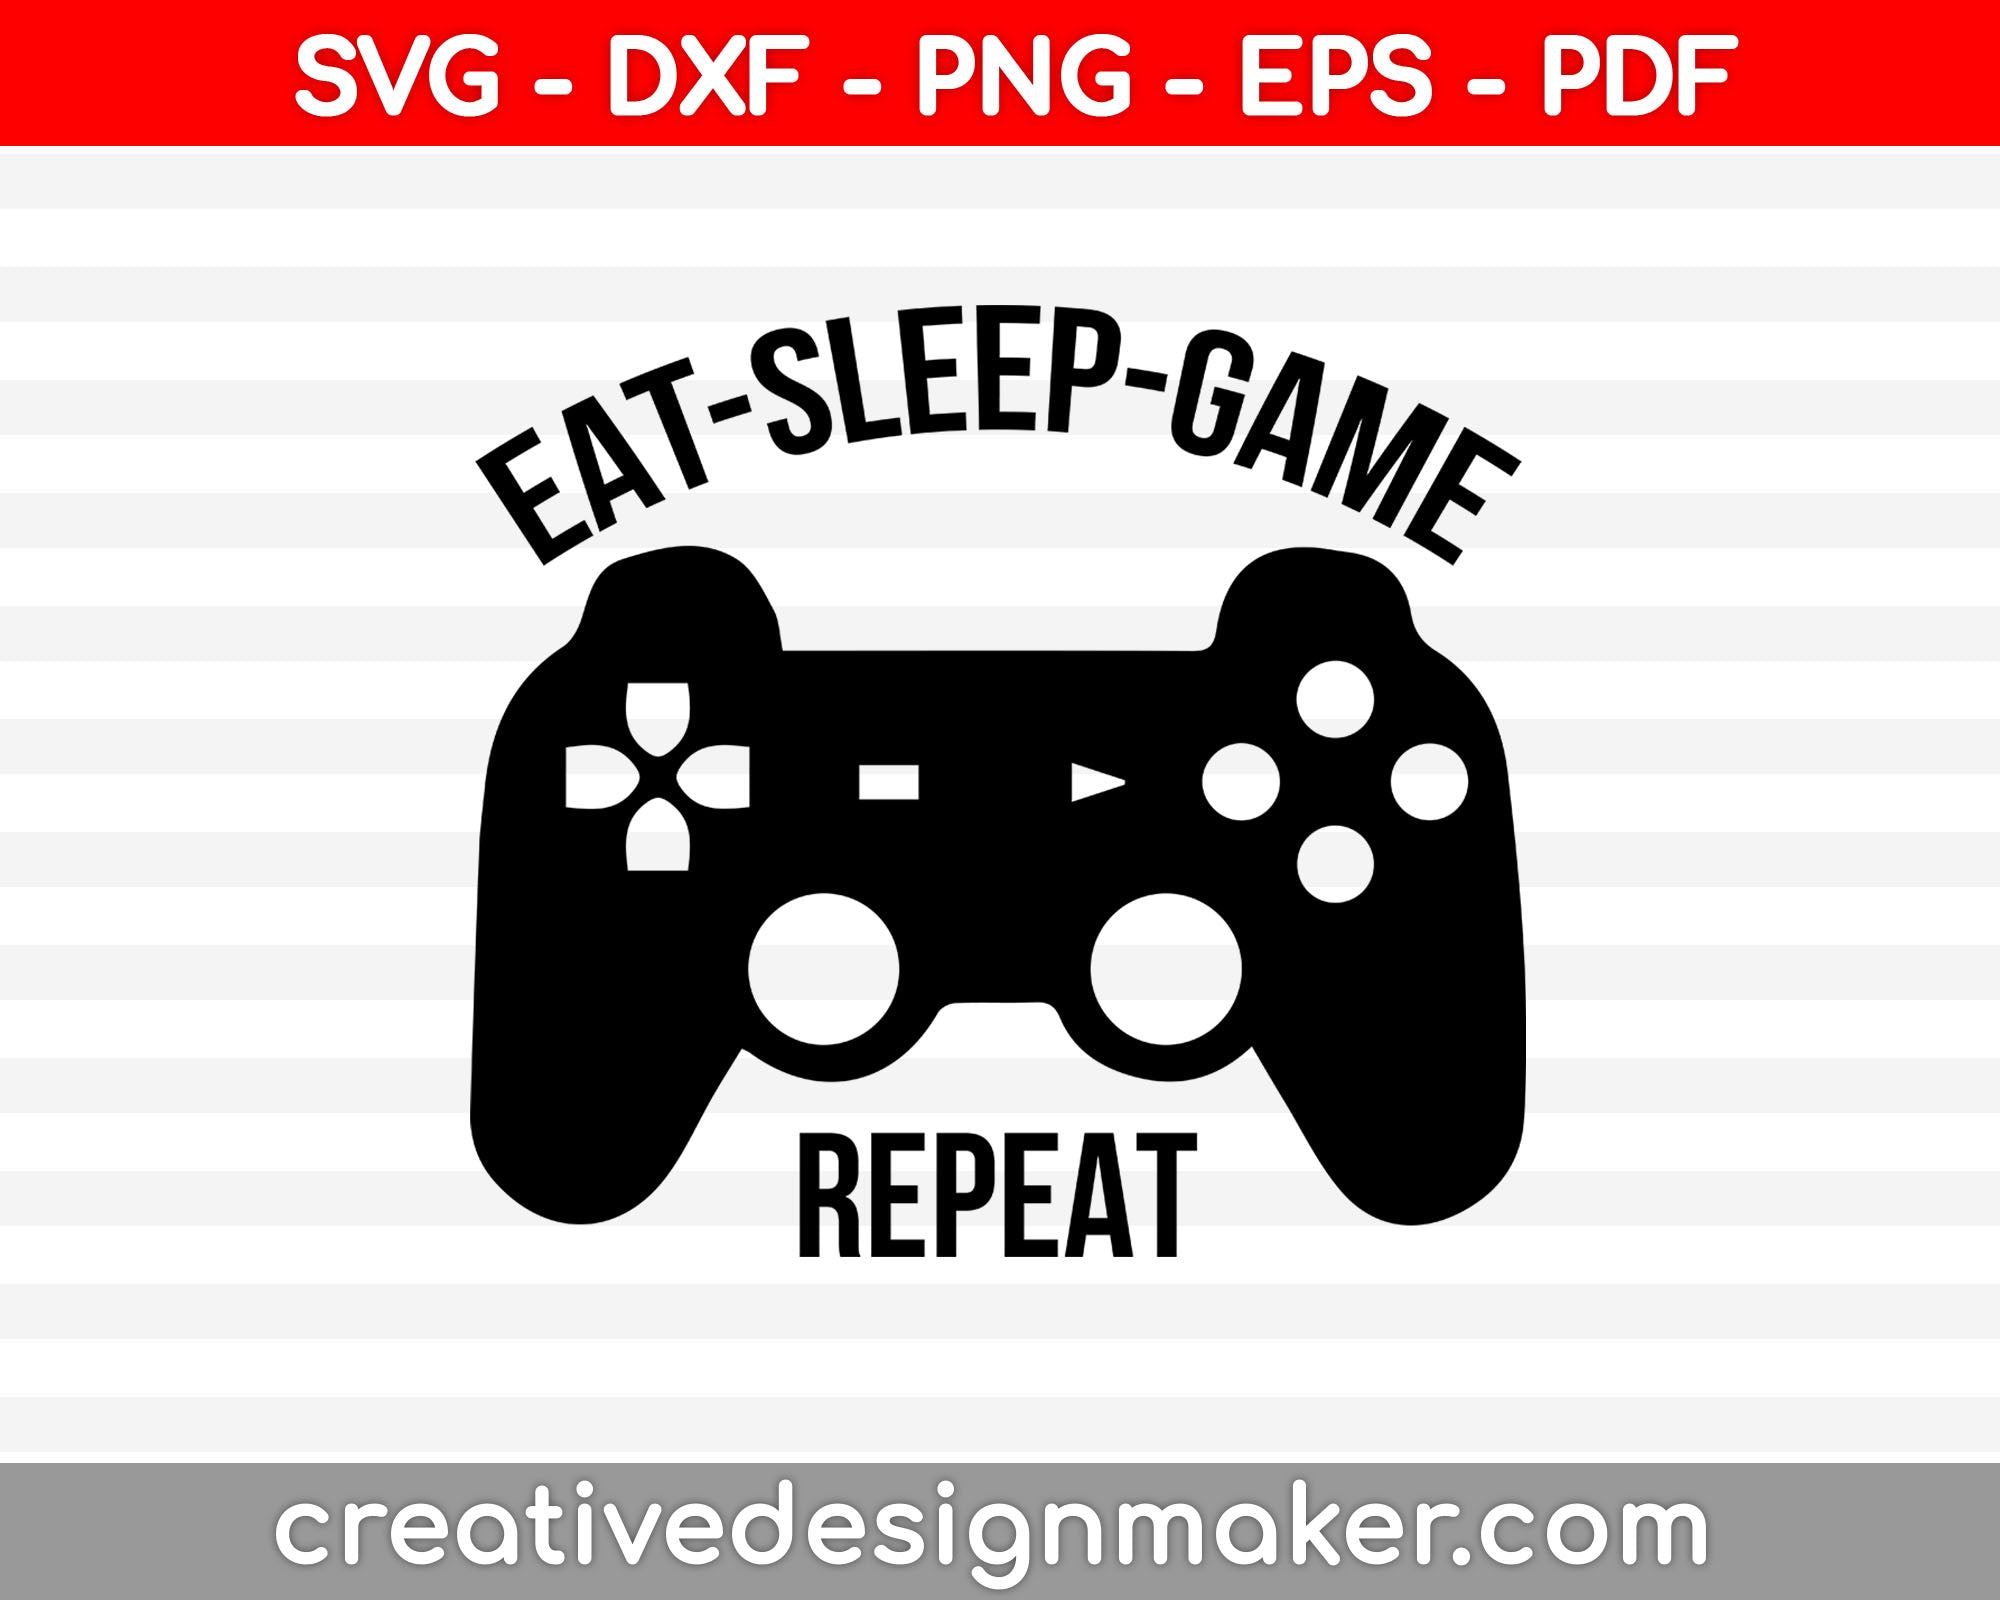 Eat sleep Mine repeat svg minecraft t-shirt design silhouette, png, cut file, vinyl, EPS, cricut/vector, clipart, stencil, digital download cameo, video game Svg Dxf Png Eps Pdf Printable Files